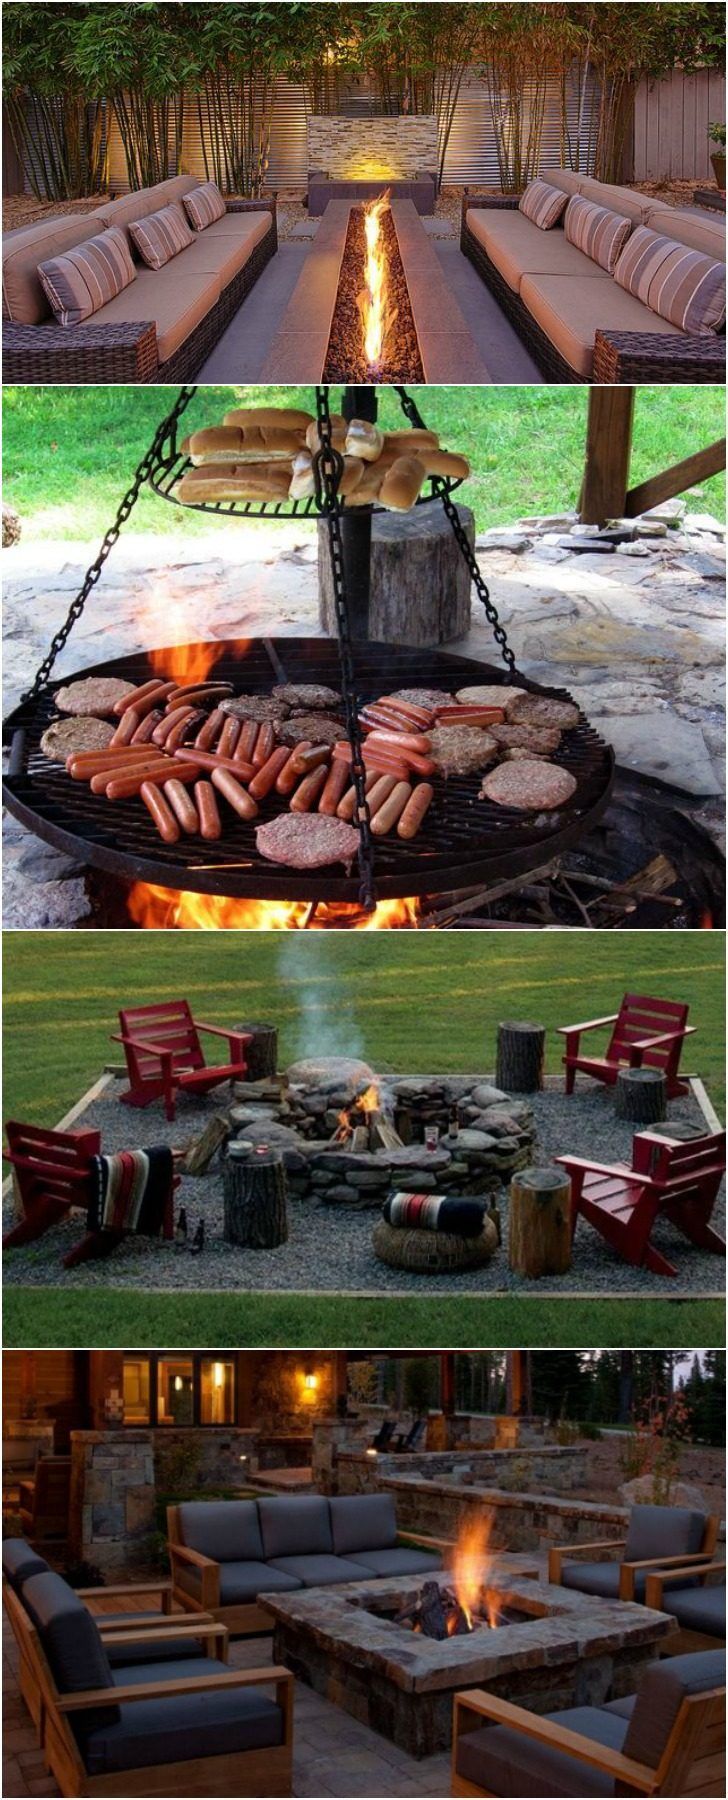 10 Outdoor Firepits Your Boss Wants to Have Grills, Bbq & Fire Pits Landscapes